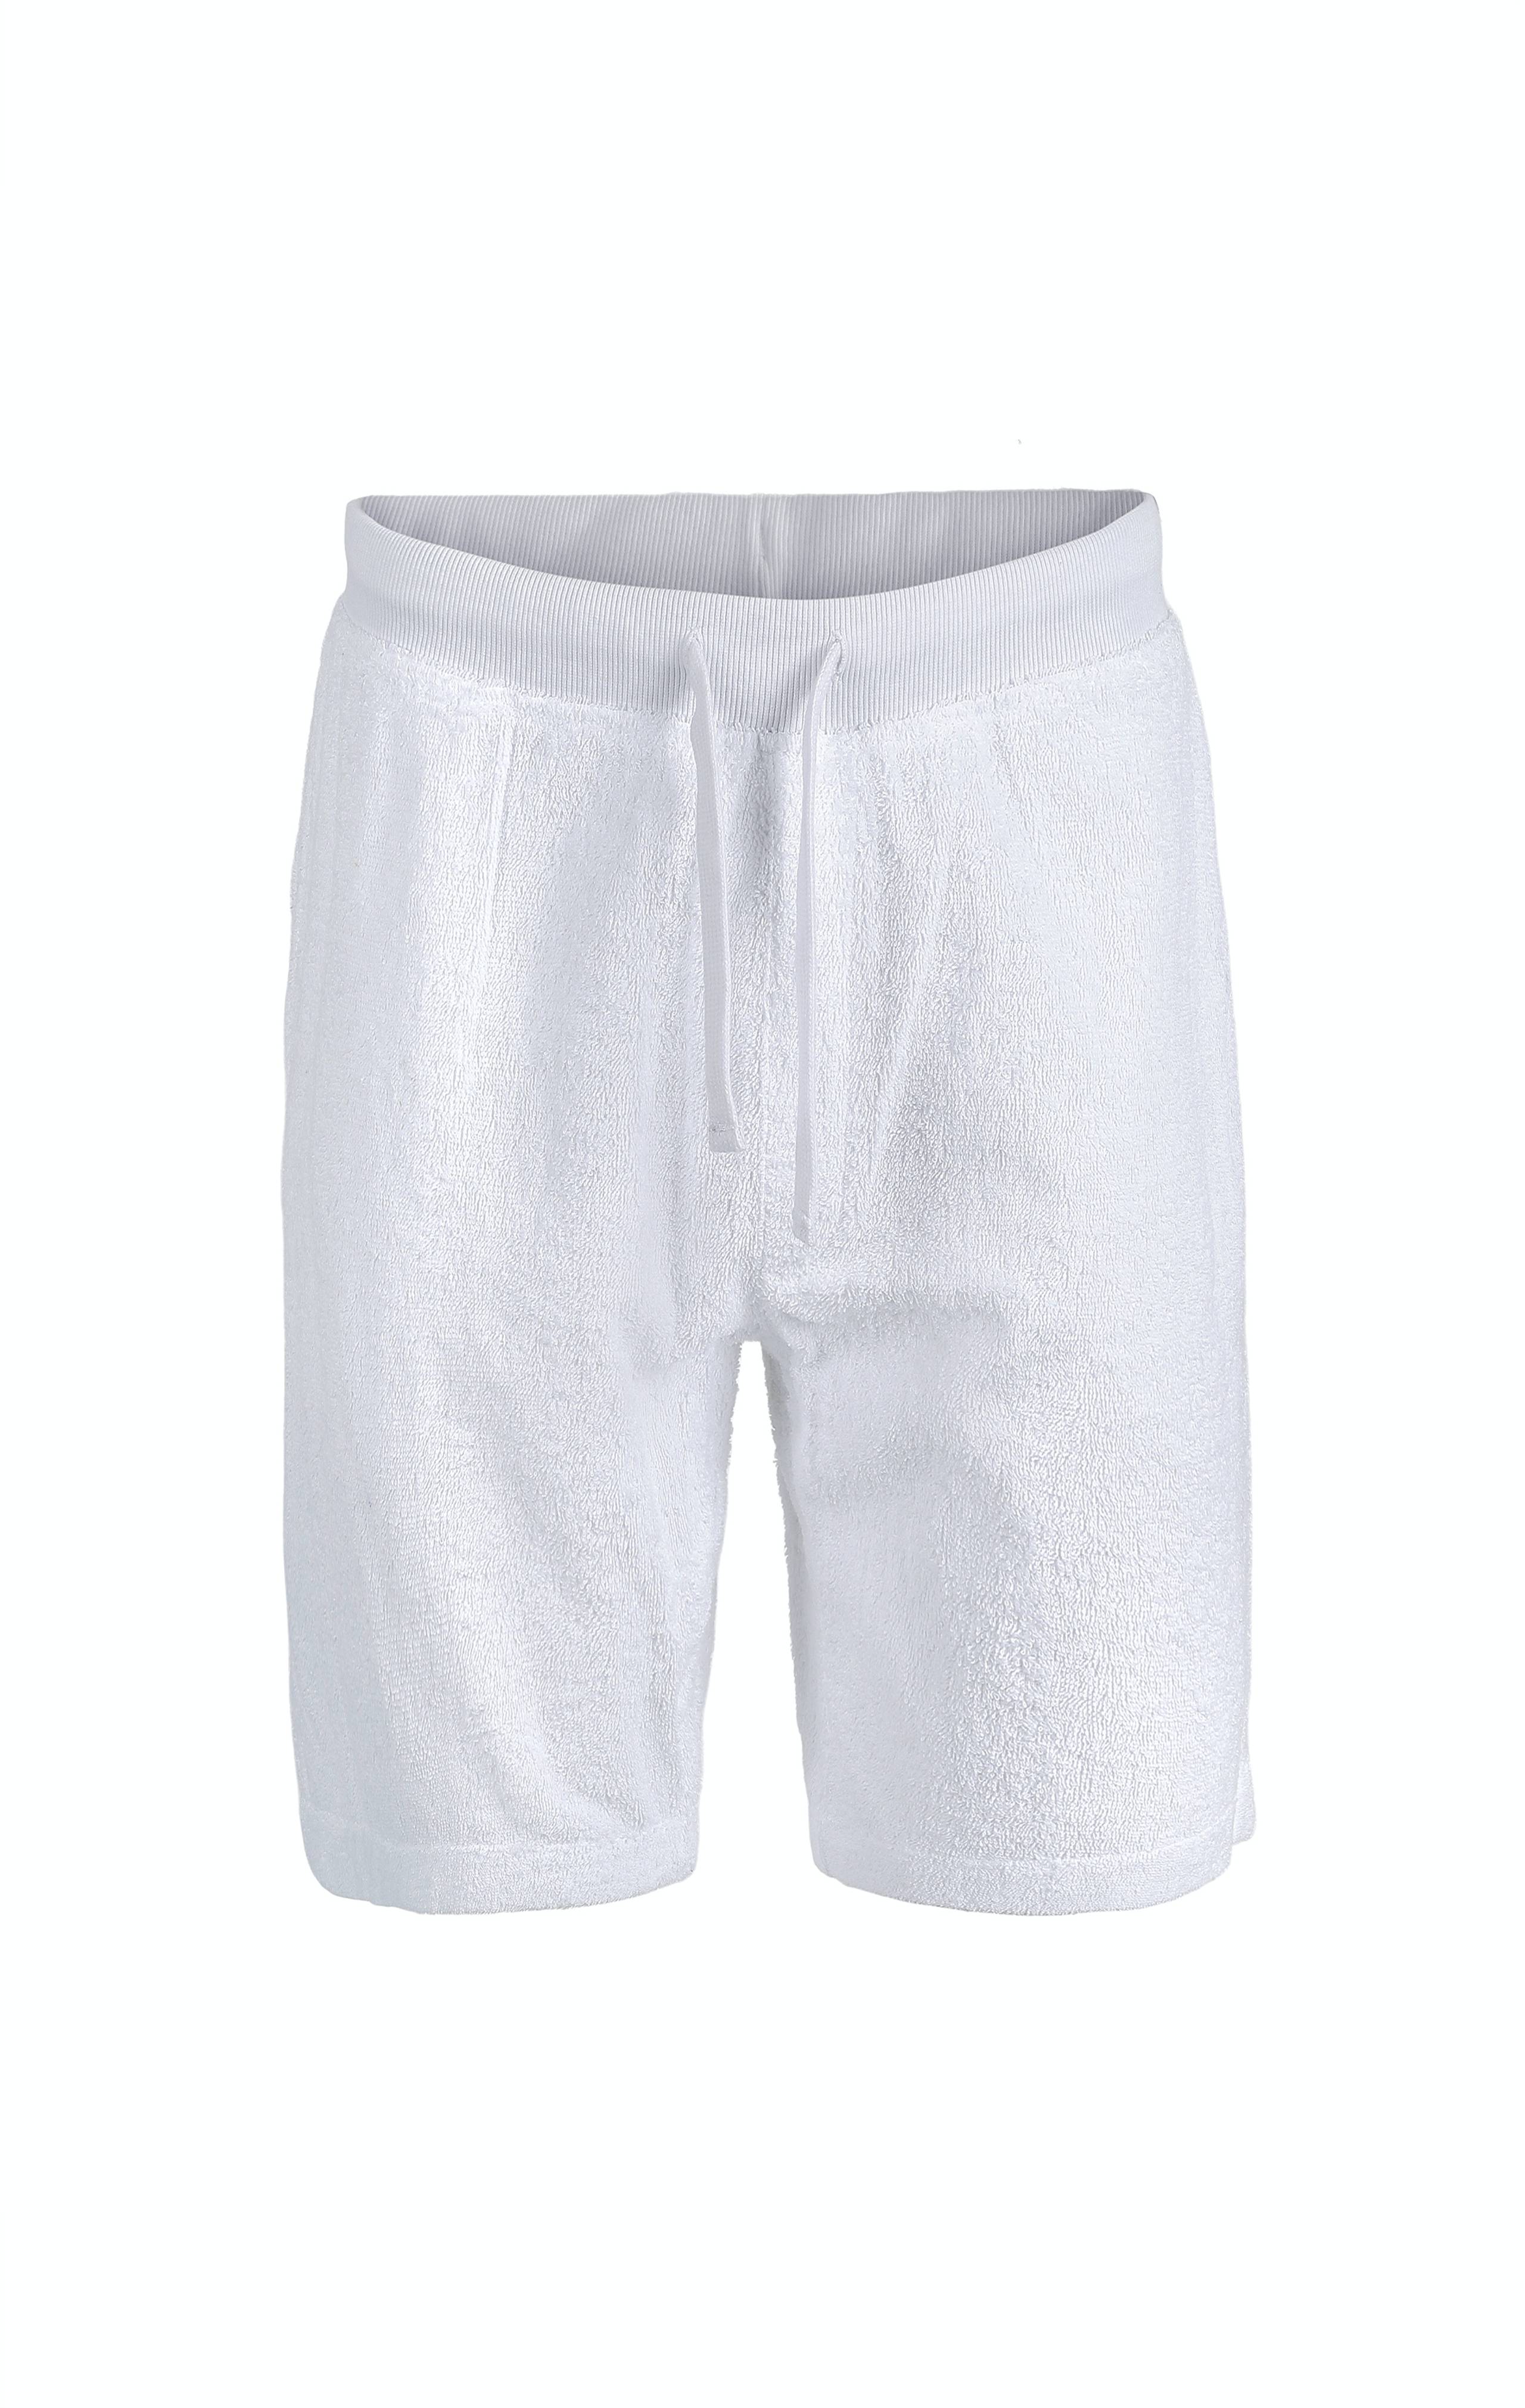 Onepiece Towel Shorts White - 1